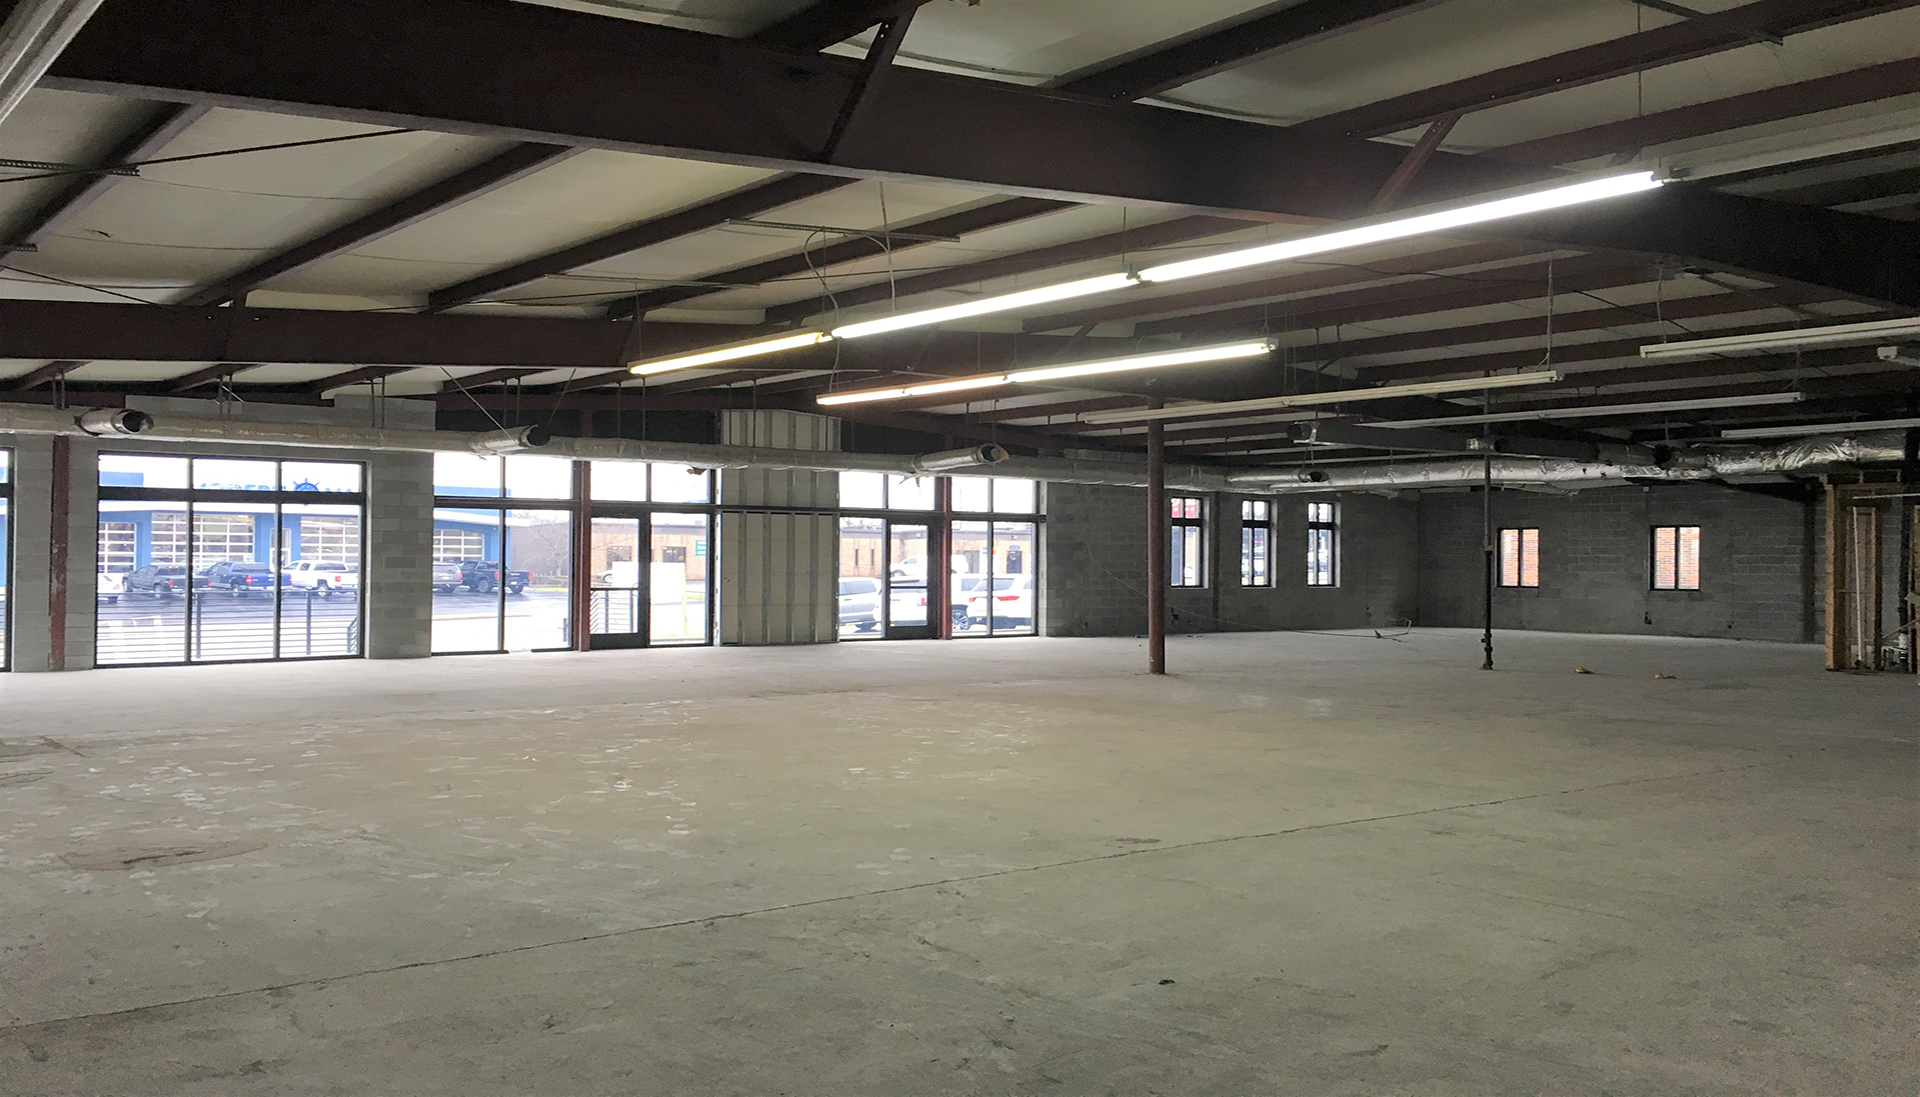 Interior of empty warehouse space before construction.